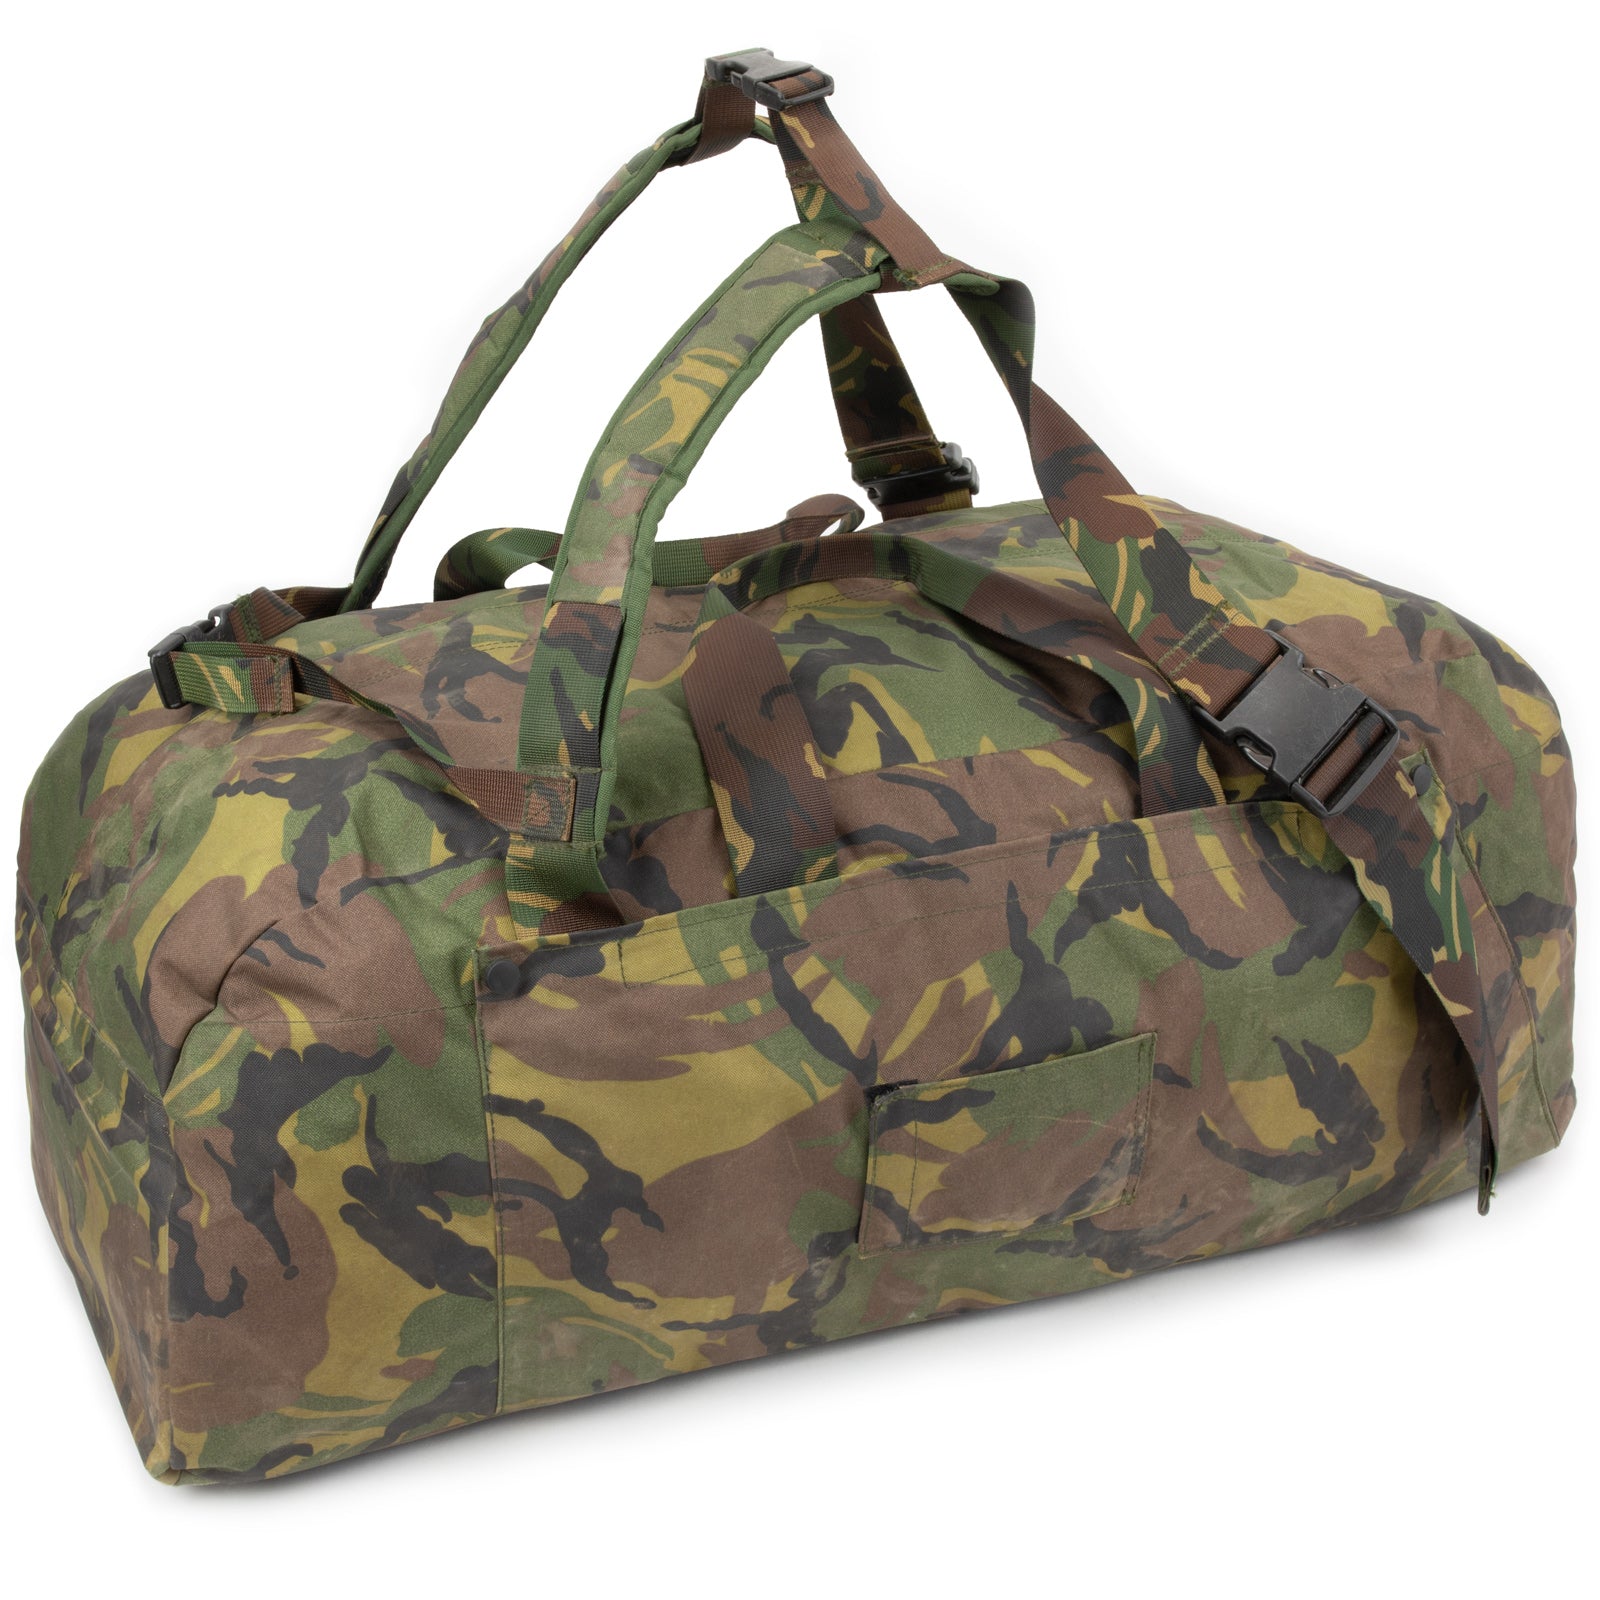 [View 29+] Army Duffle Bag Backpack